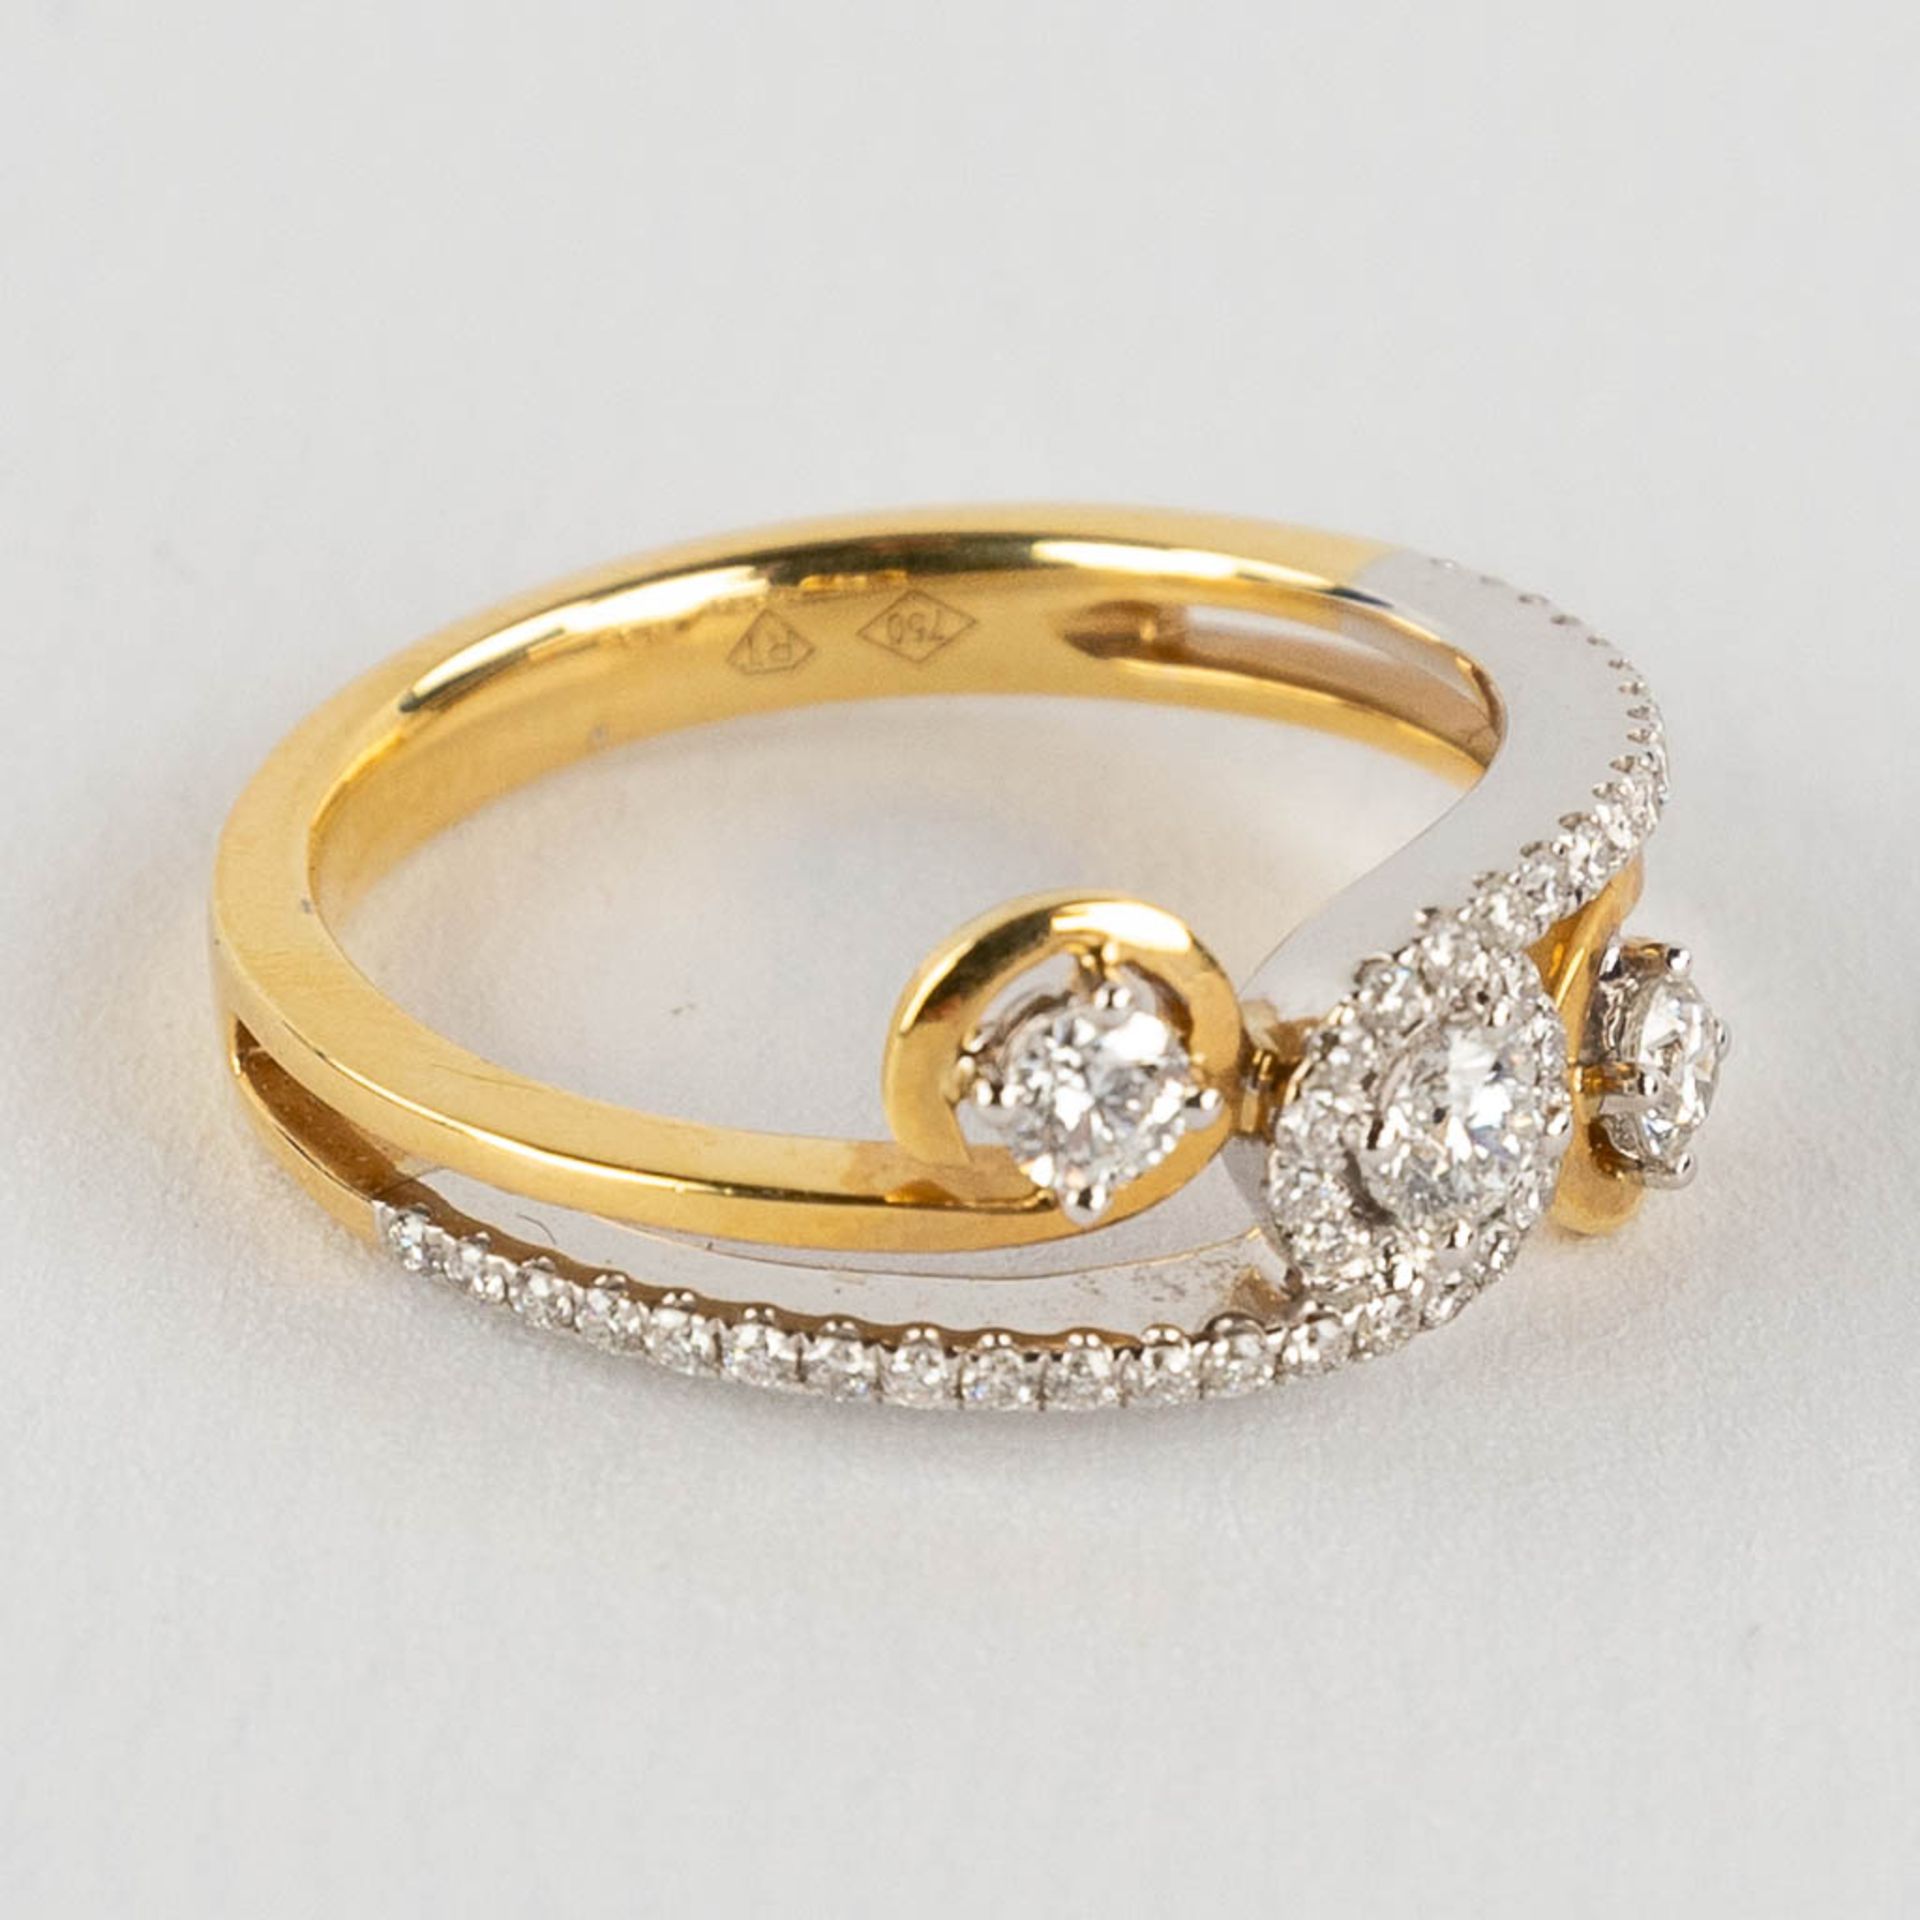 A ring, 18kt yellow and white gold with diamonds, appr. 0,48ct. Ring size 54. - Image 3 of 11